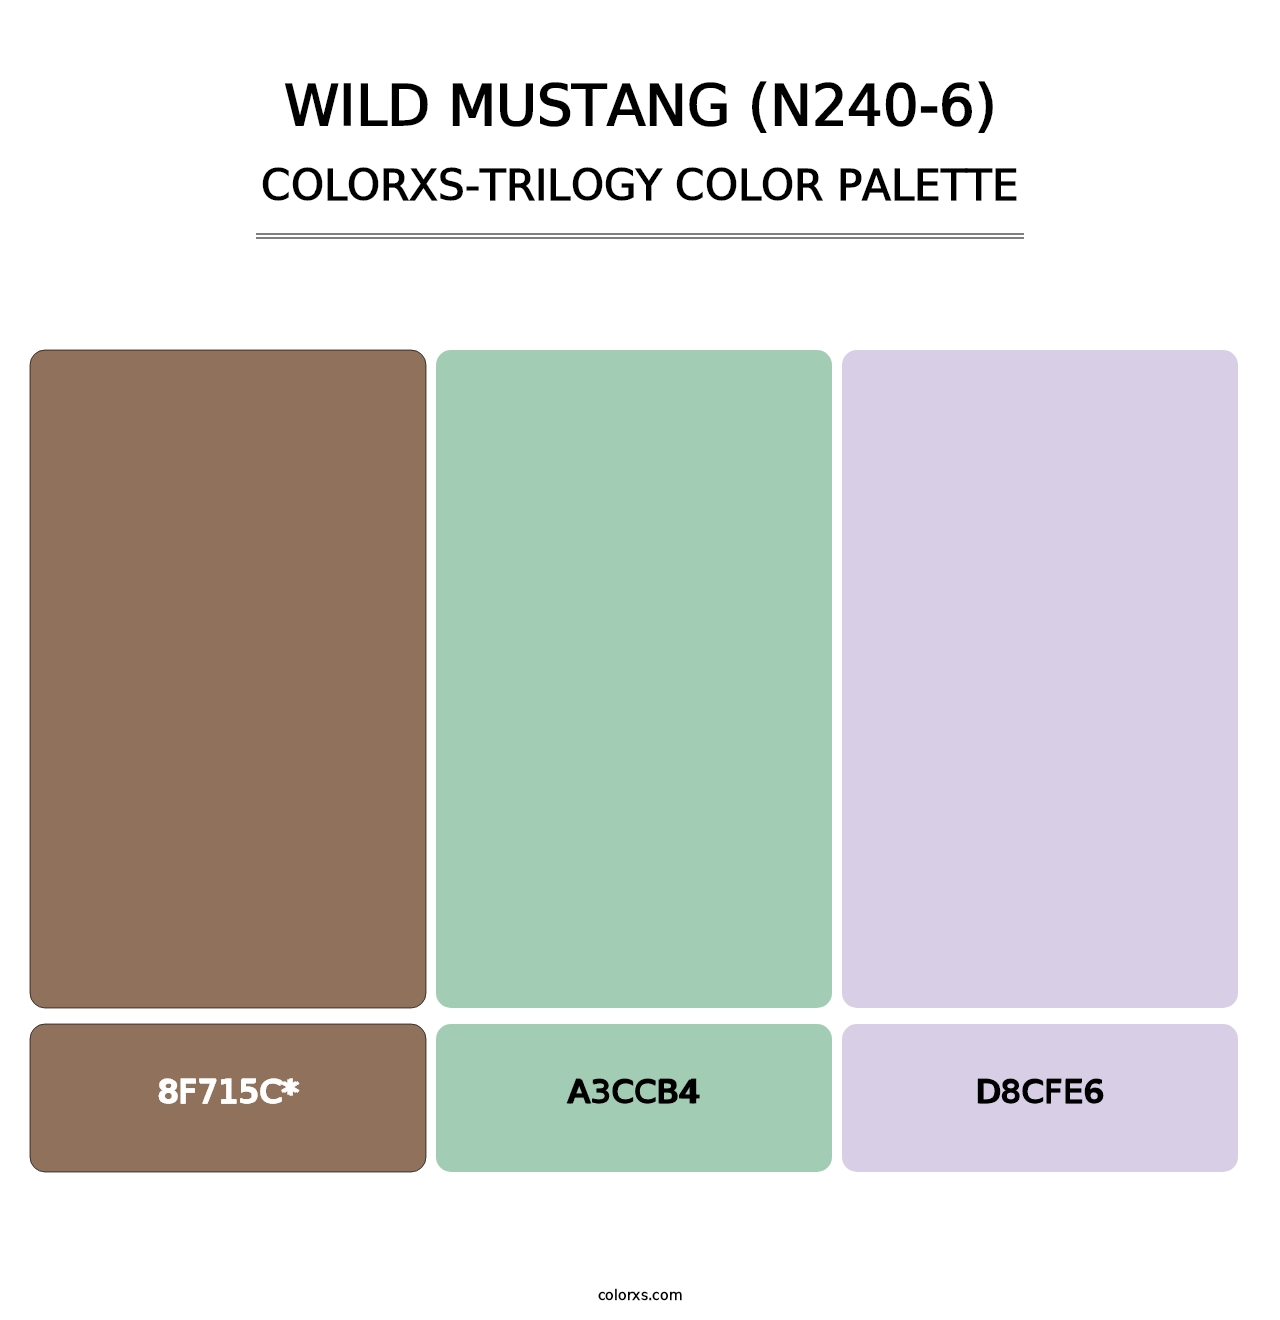 Wild Mustang (N240-6) - Colorxs Trilogy Palette